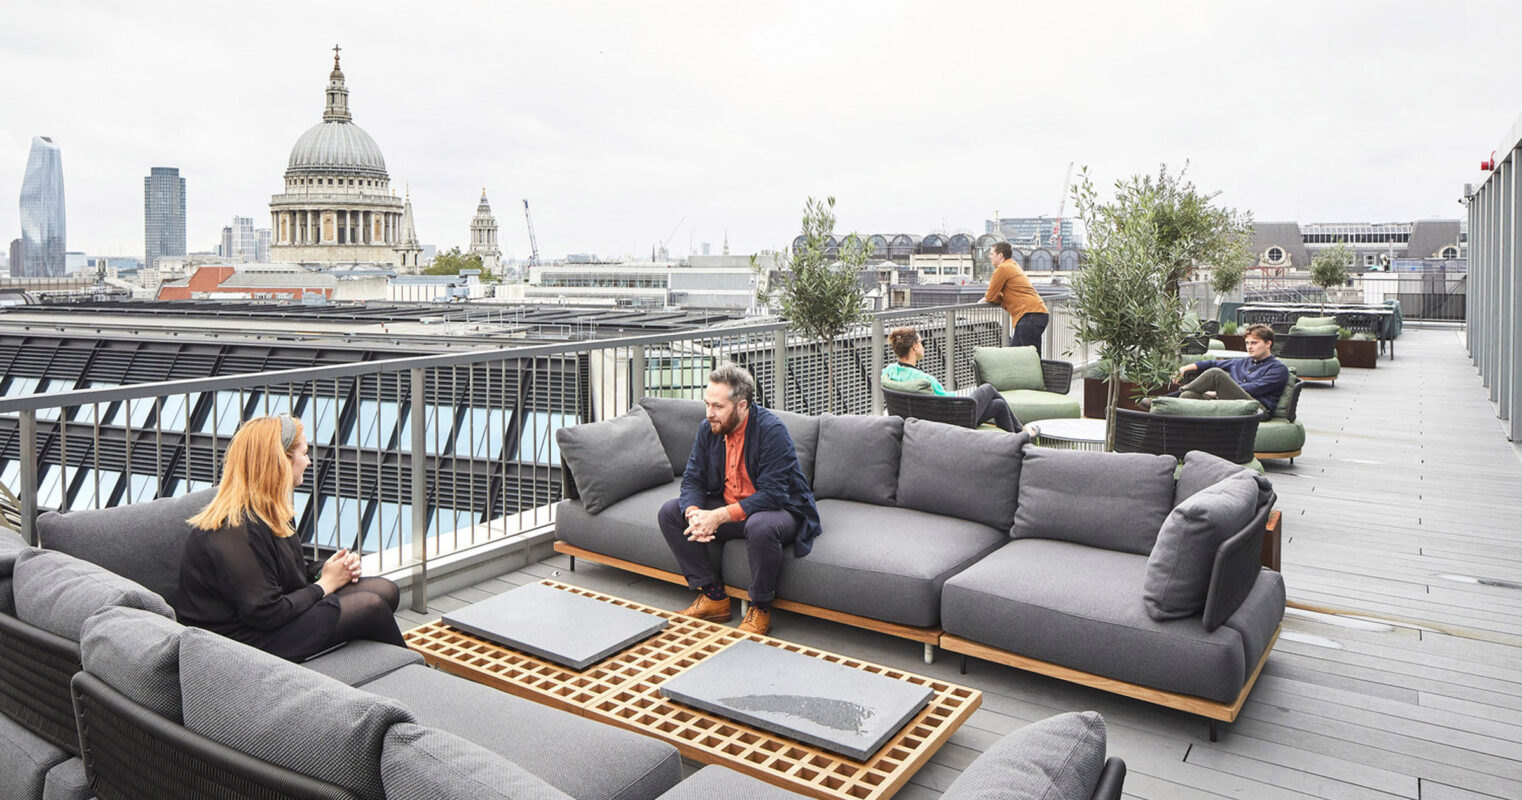 Rooftop garden terrace featuring contemporary, modular lounging furniture with plush cushions, complemented by minimalistic outdoor rugs and wooden accent tables. Urban skyline backdrop includes the iconic dome of St. Paul's Cathedral, enhancing the sophisticated, metropolitan ambiance of the space.